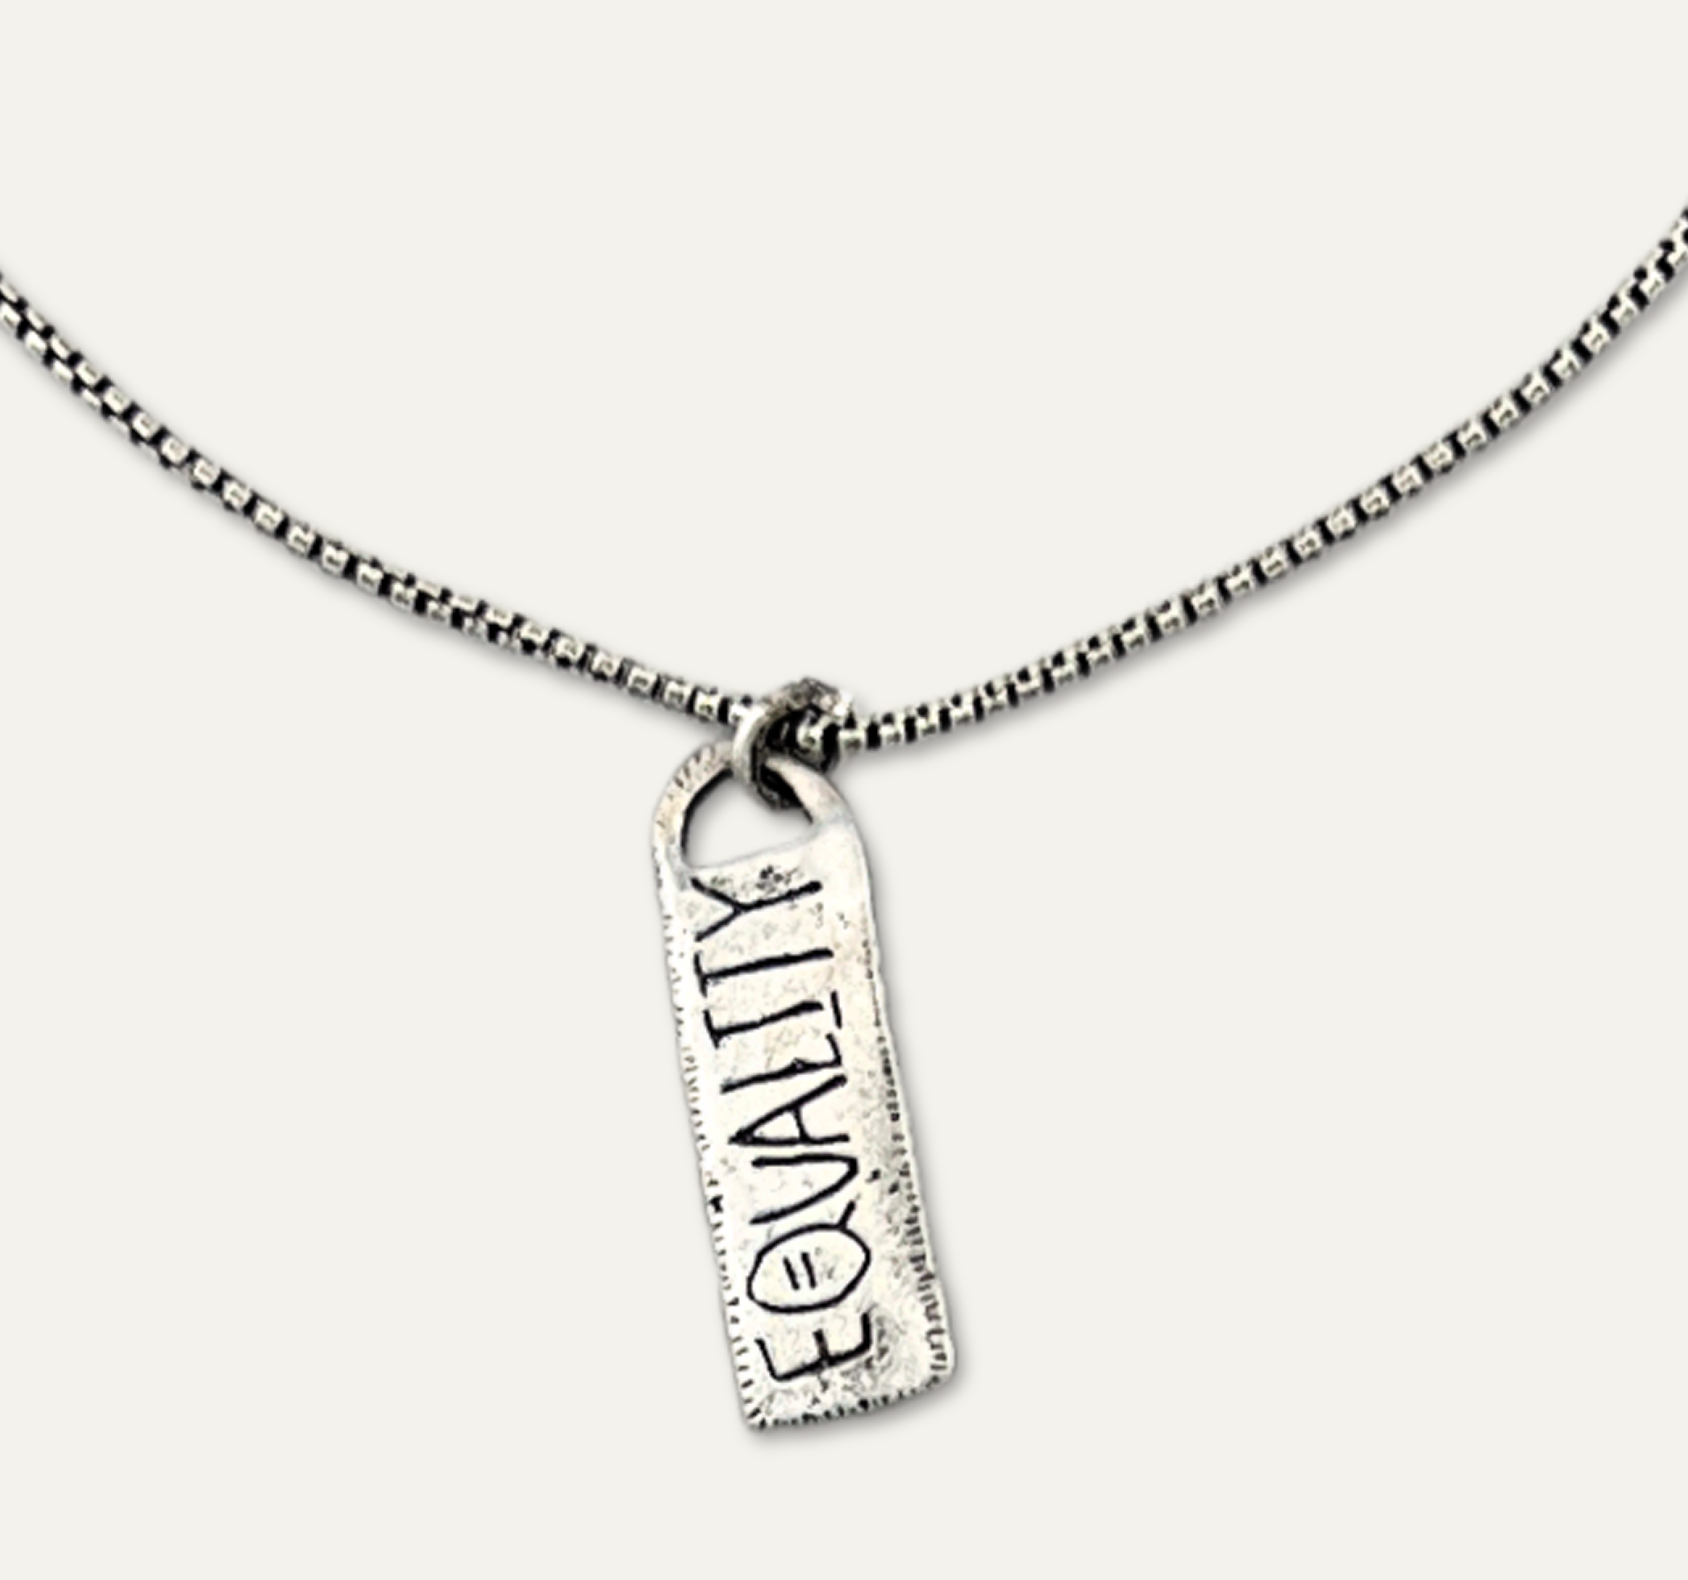 Equality Dog Tag Necklace